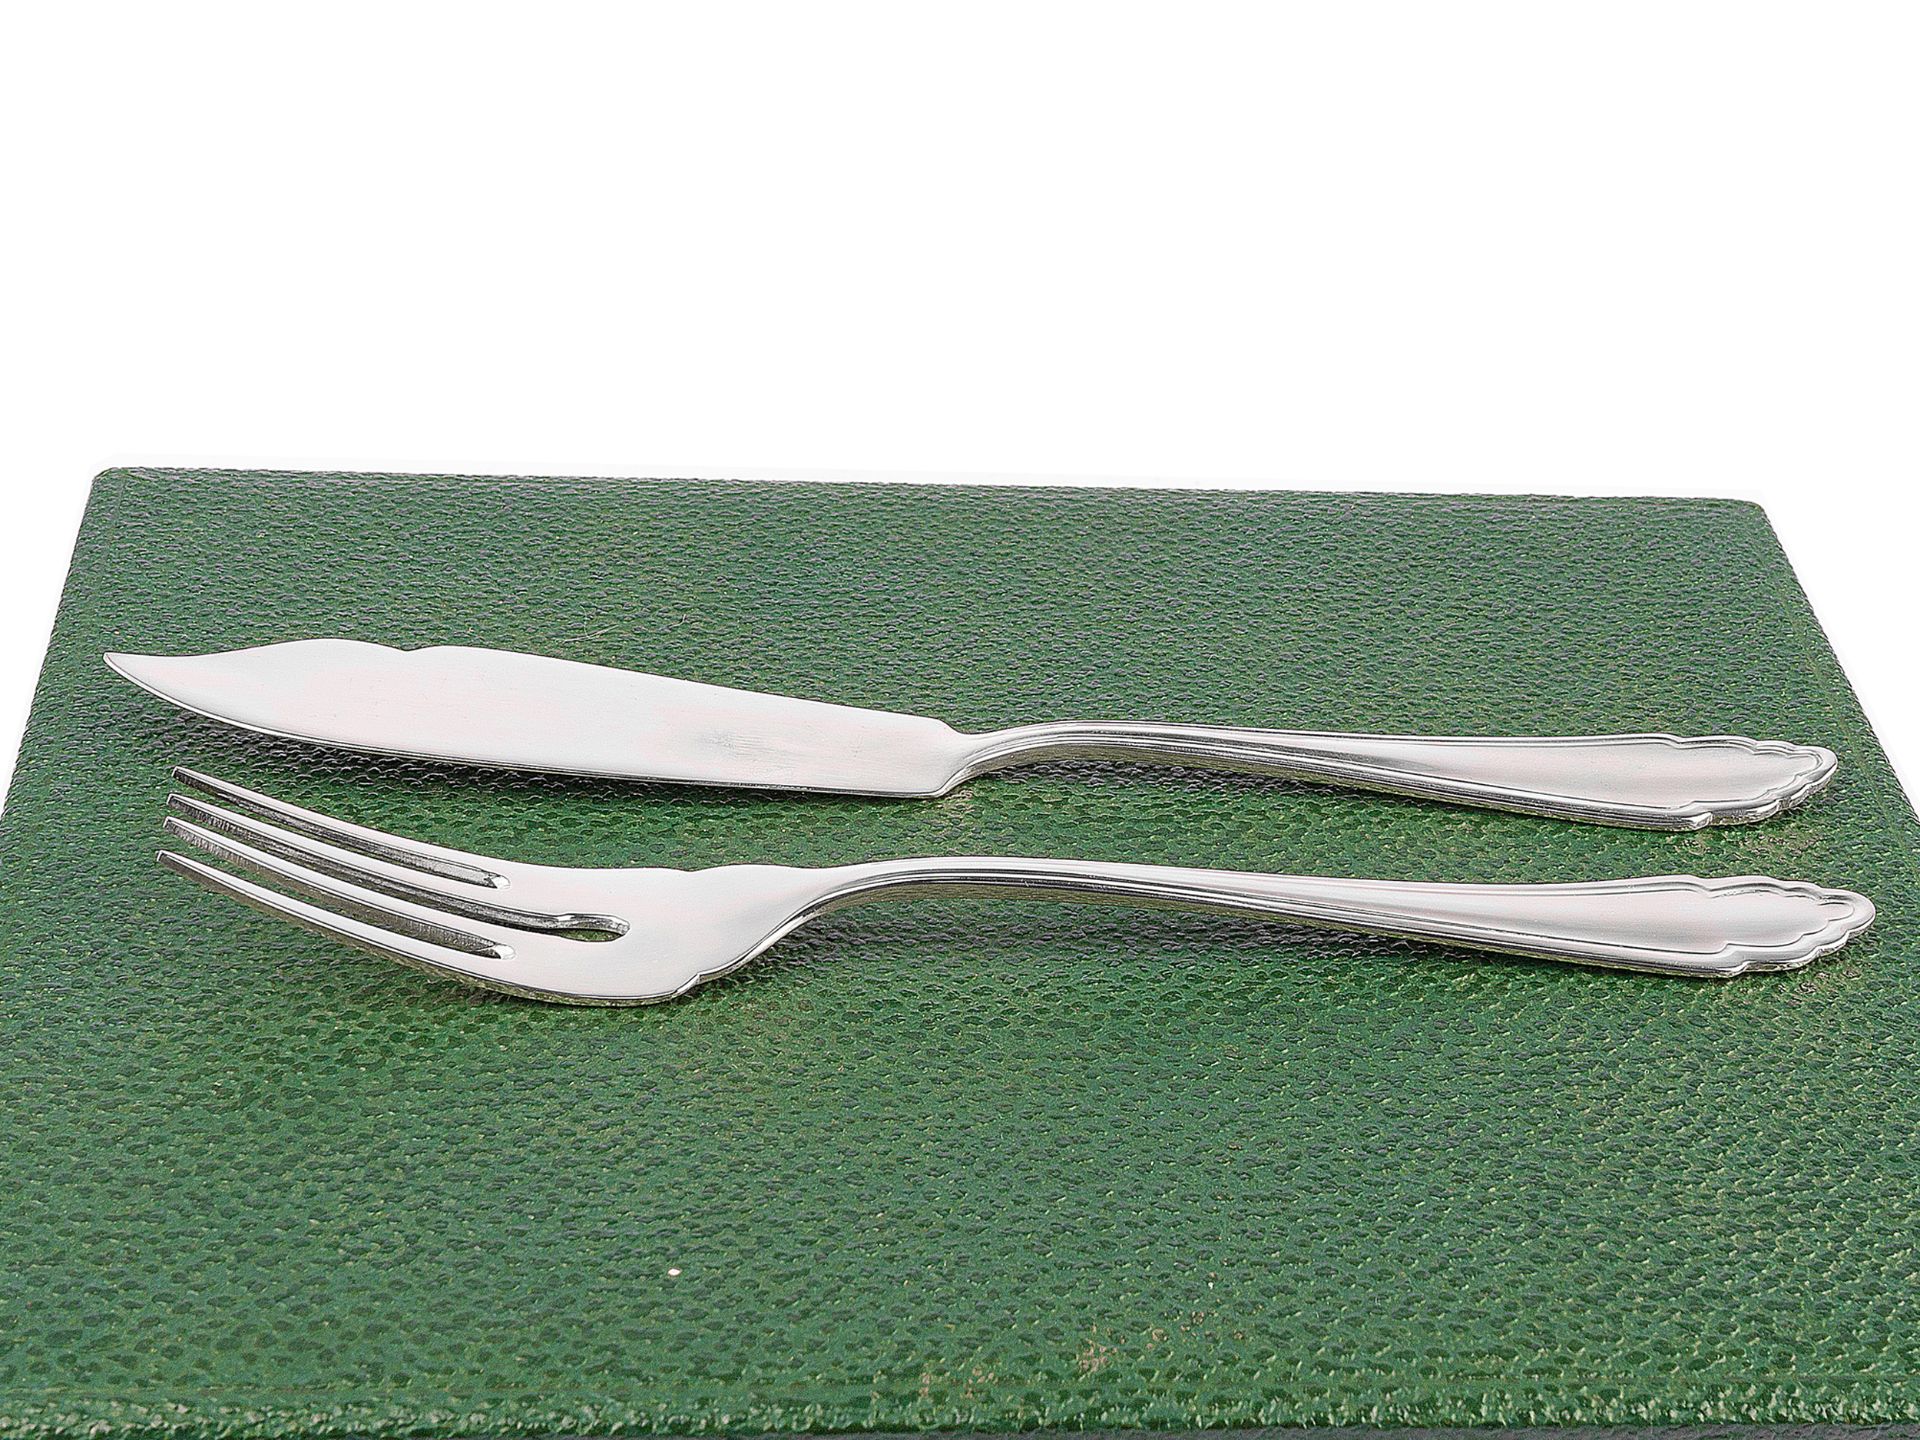 Fish cutlery for 6 persons, 800 silver marked - Image 2 of 5